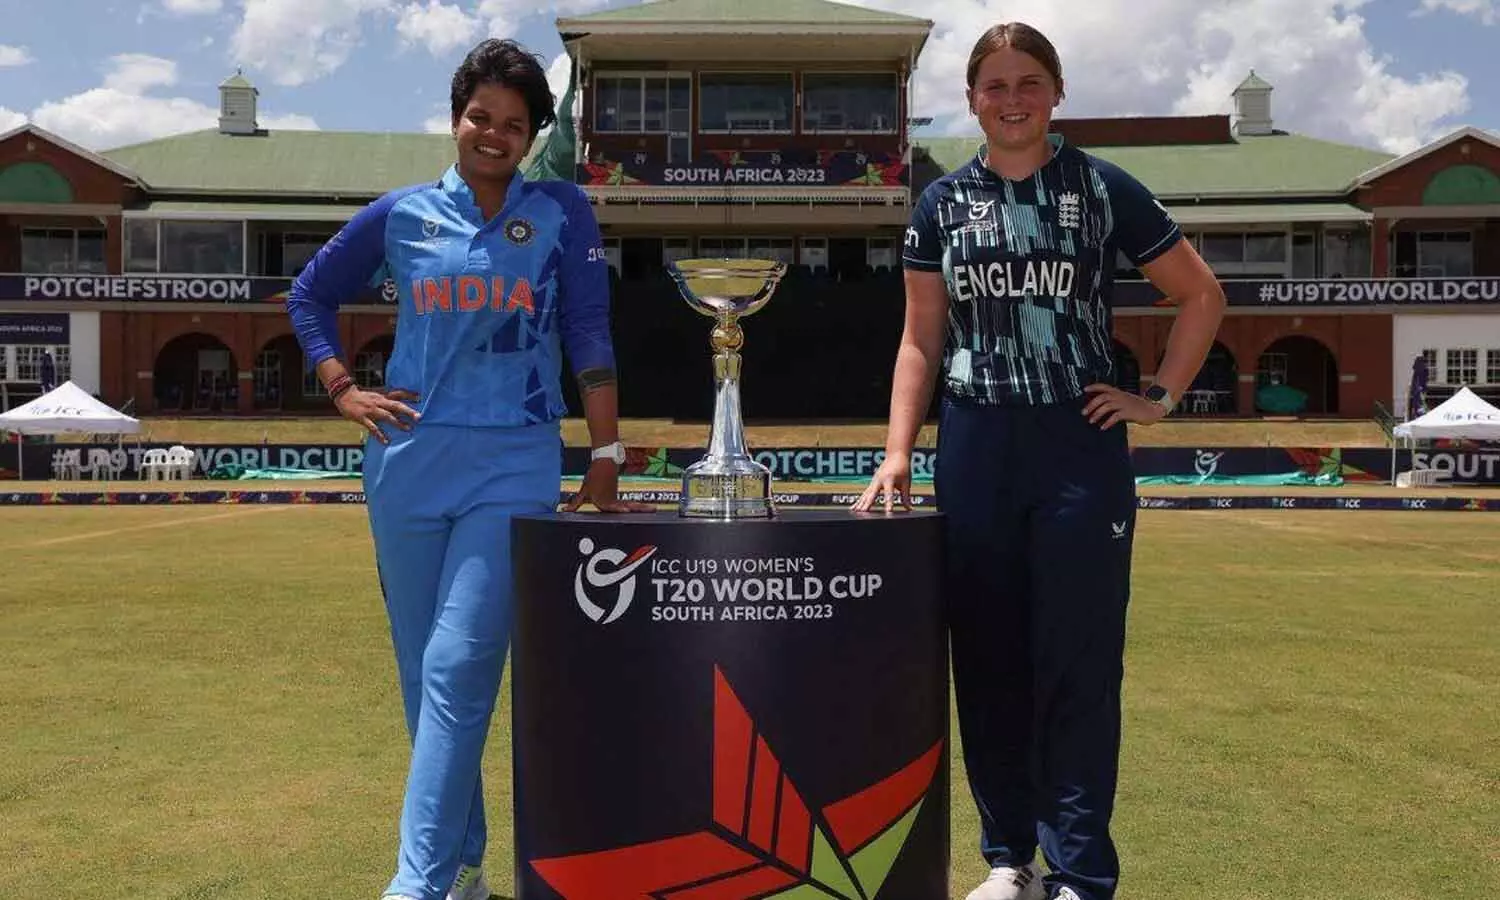 Indian girls won the World Cup by defeating England by 7 wickets